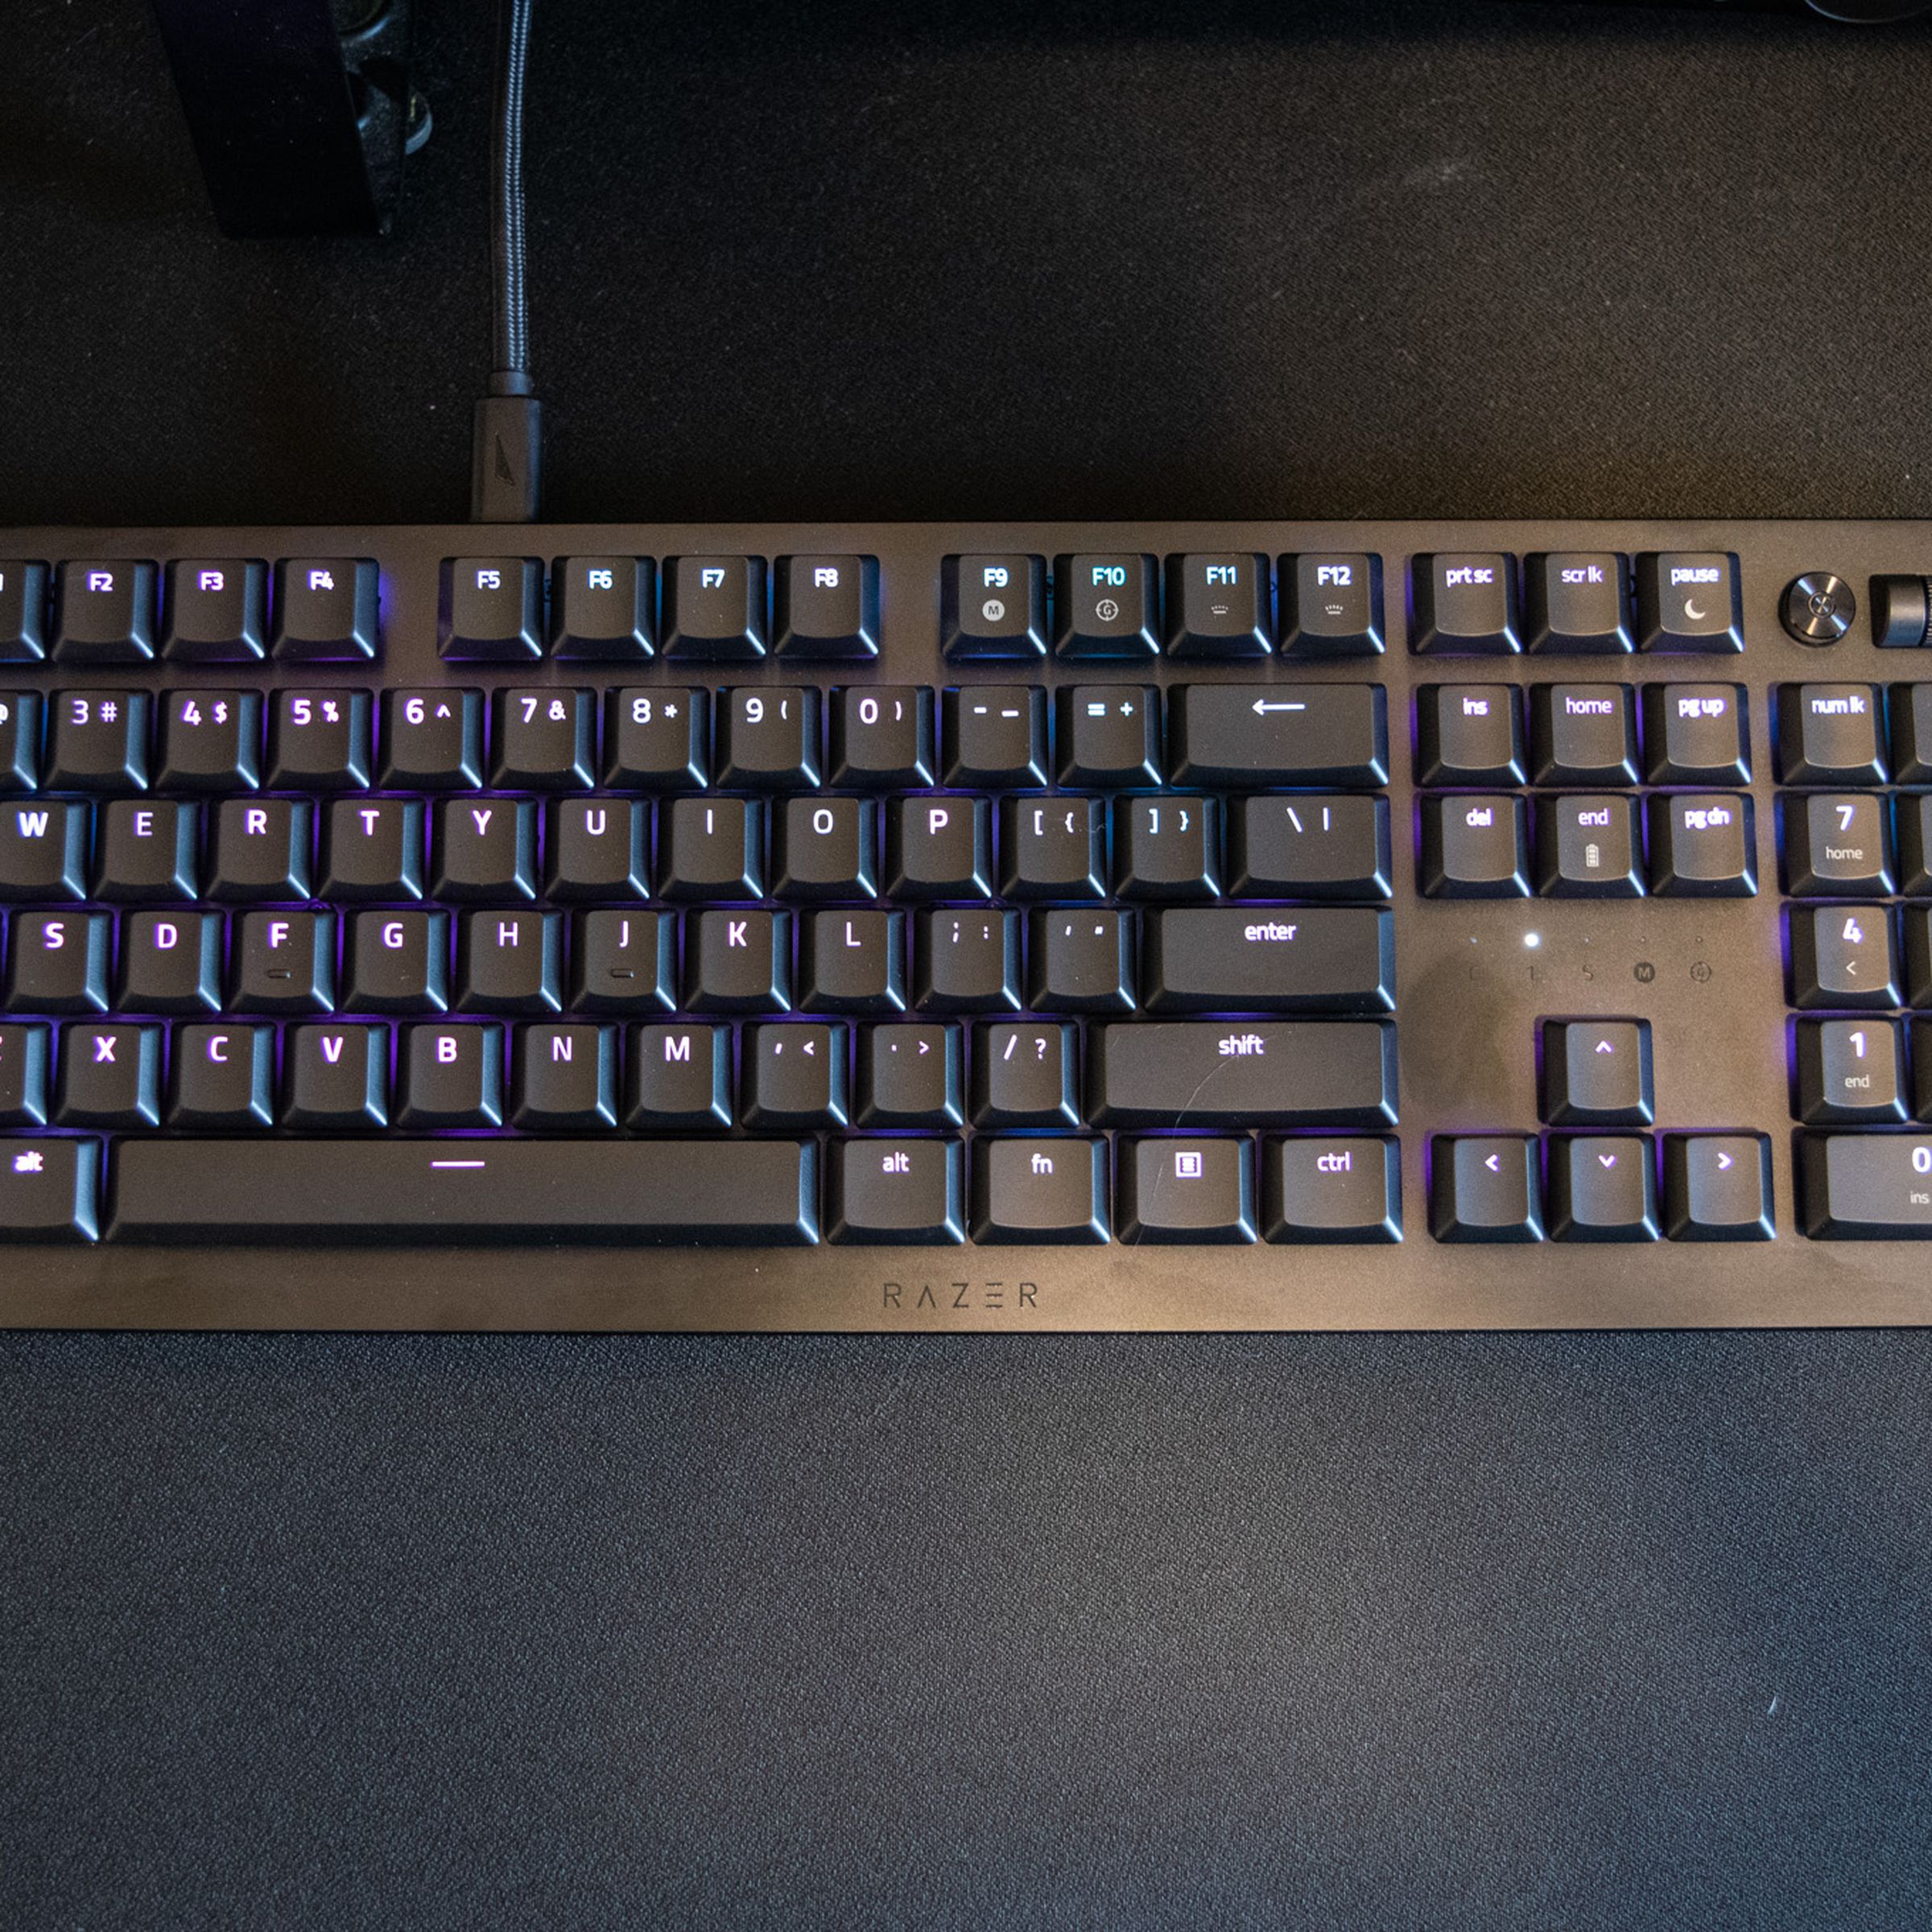 The DeathStalker V2 Pro incorporates low-profile versions of Razer’s optical mechanical switches.